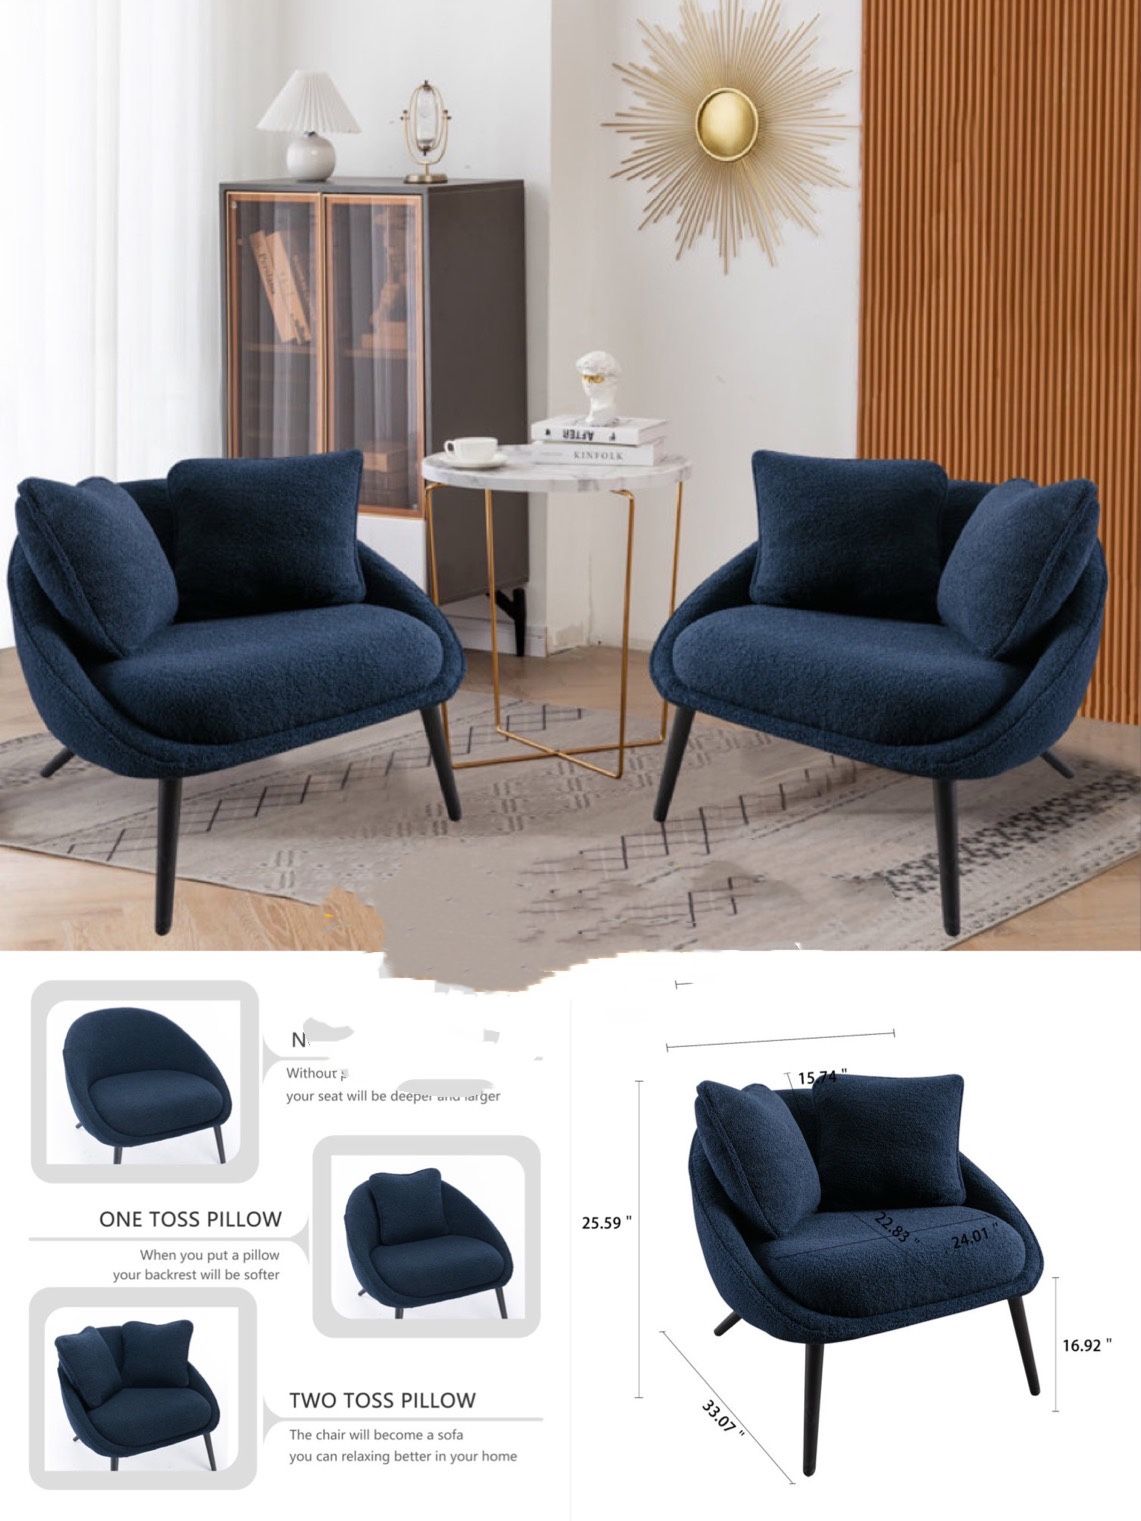 Set Of 2 Armchair navy with 2 pillows wood legs